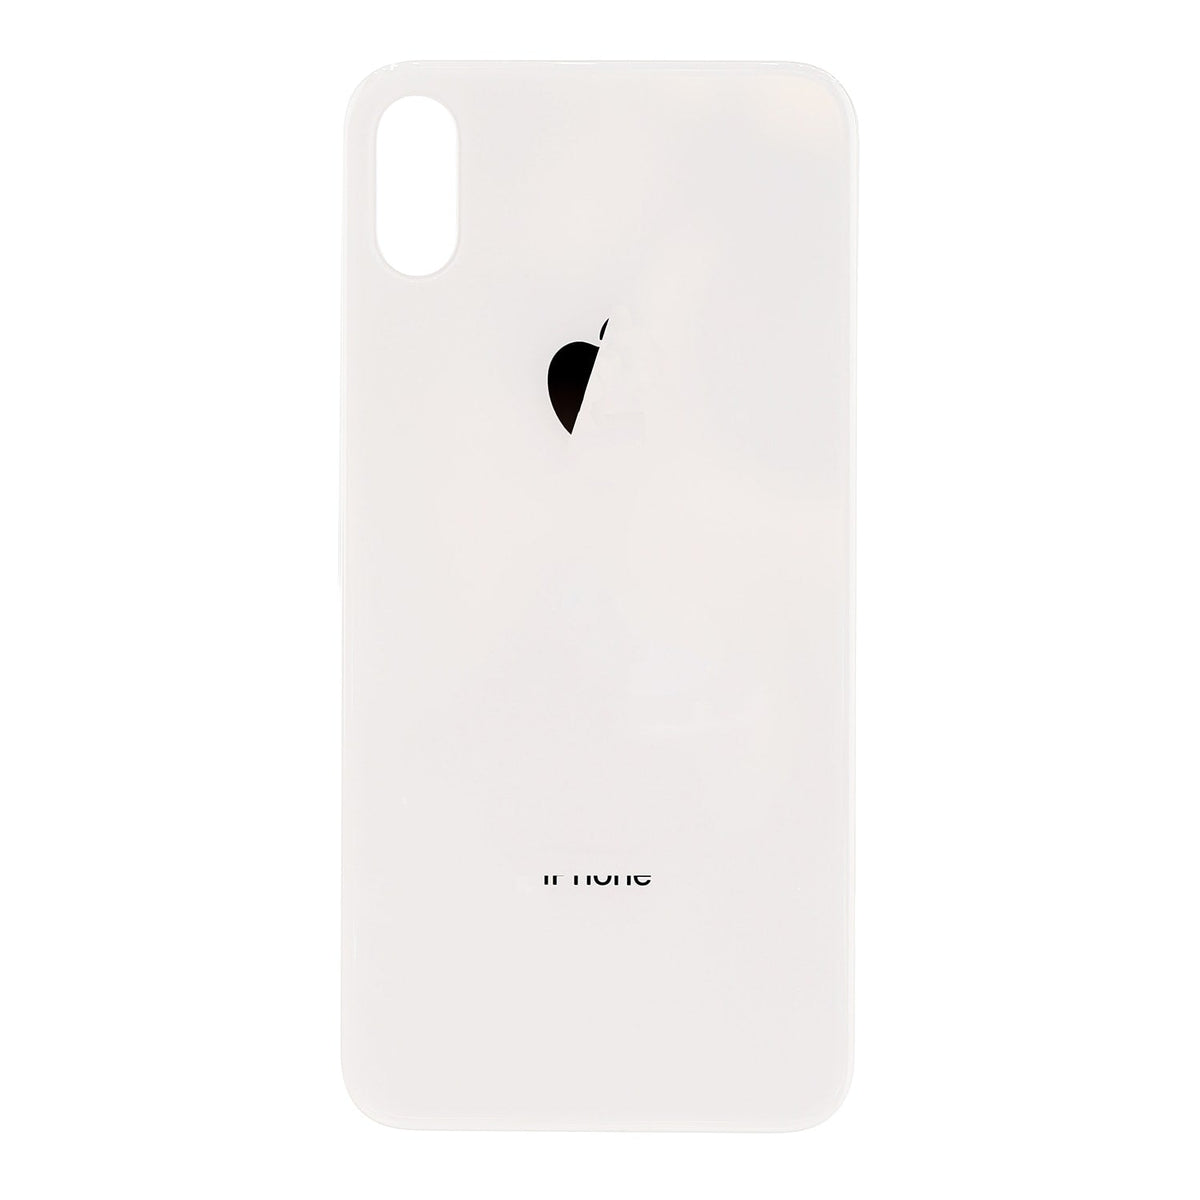 SILVER BACK COVER  FOR IPHONE X